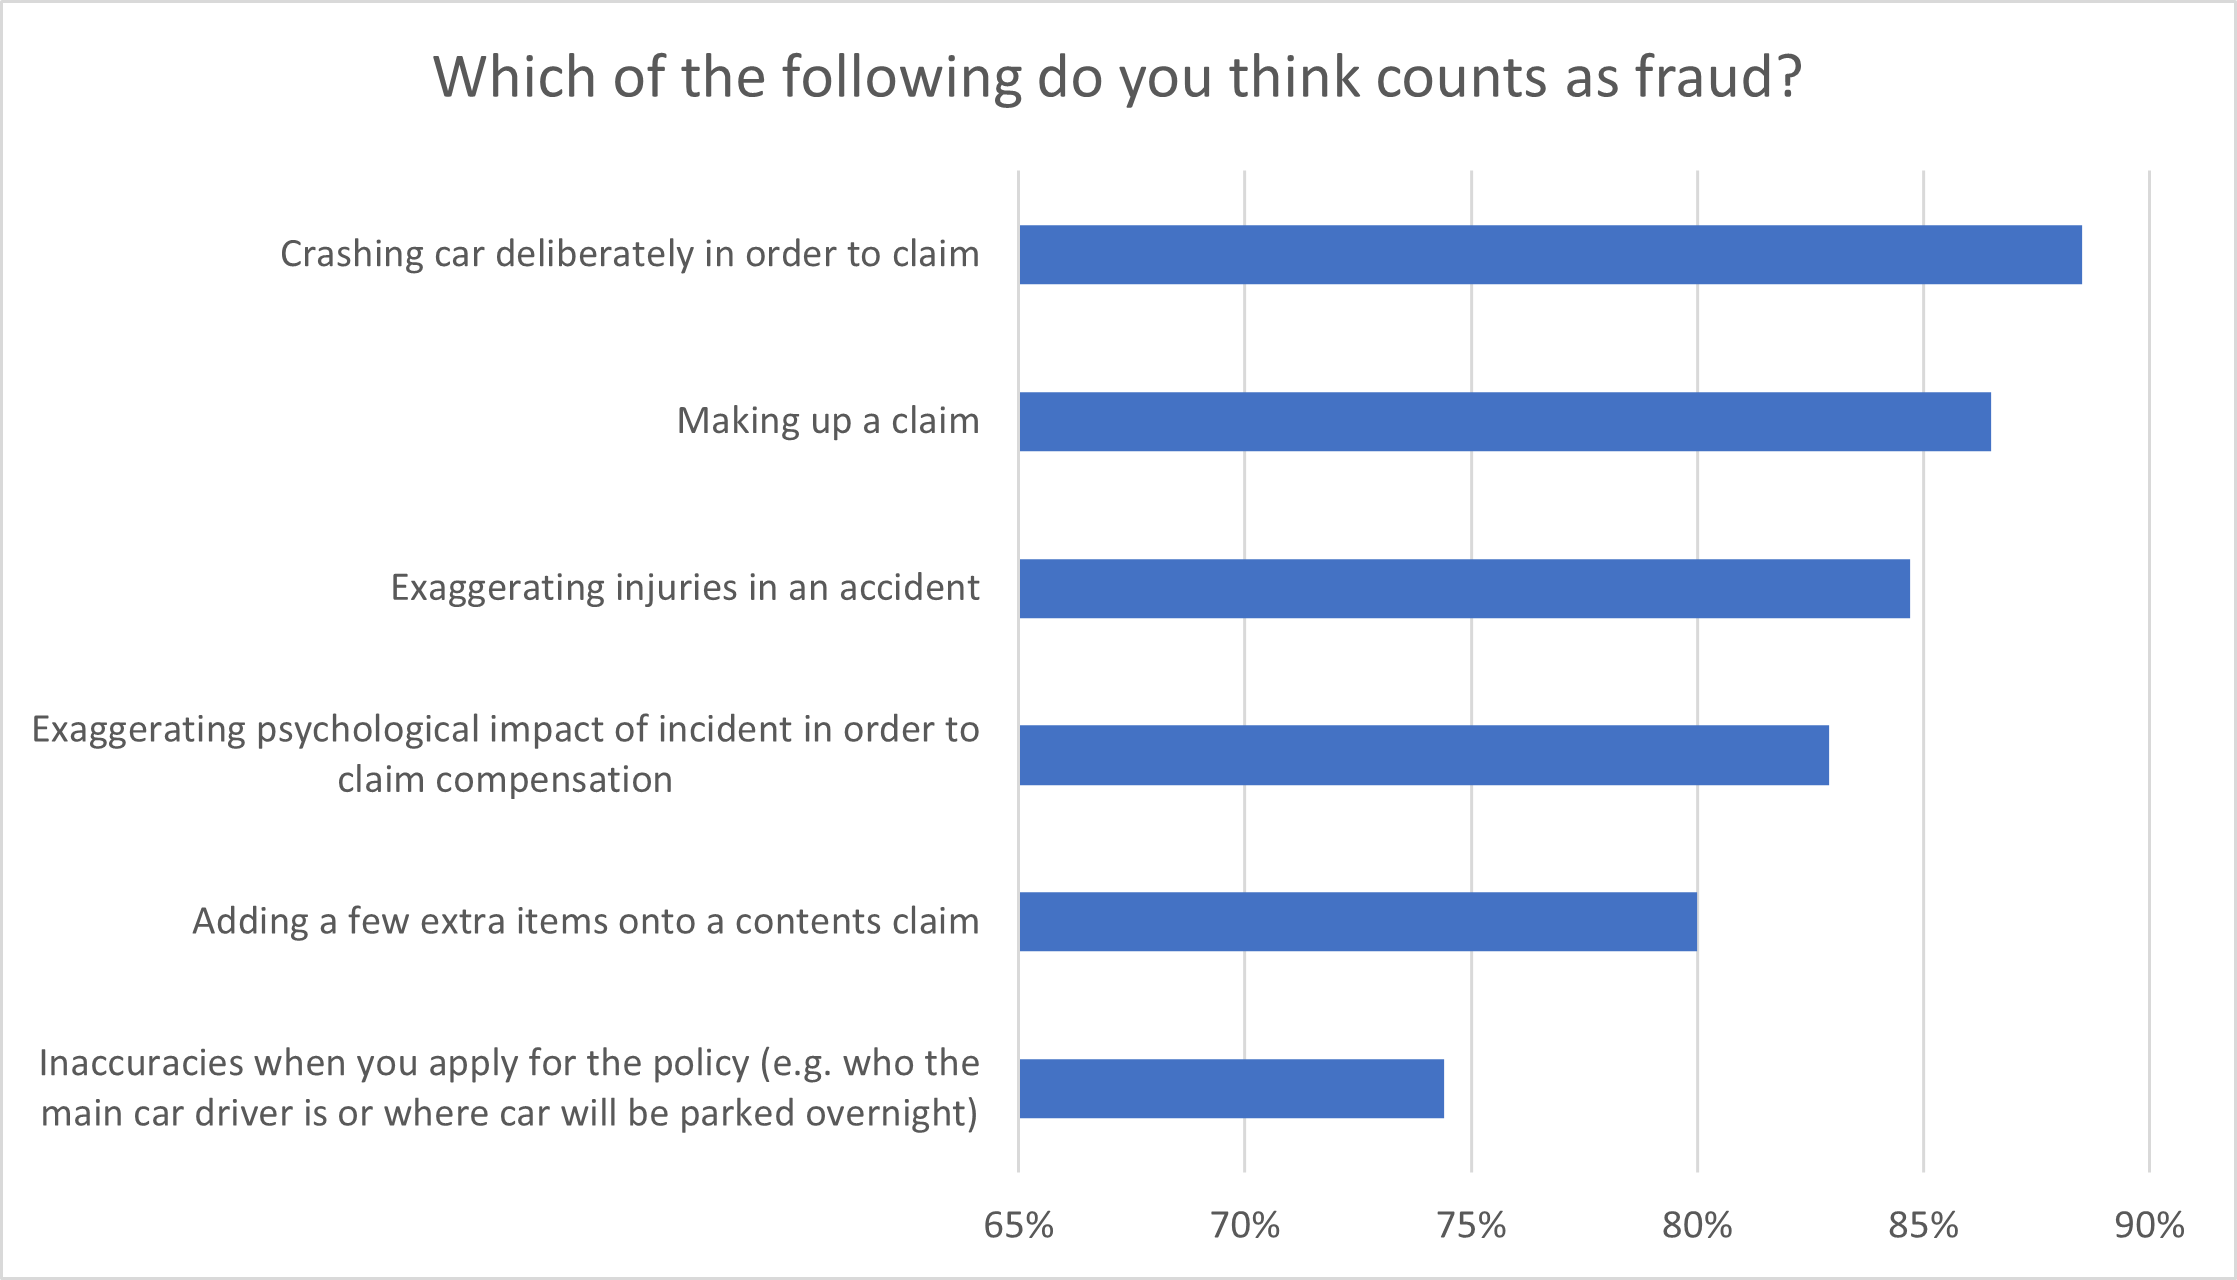 Which of the following do you think counts as fraud